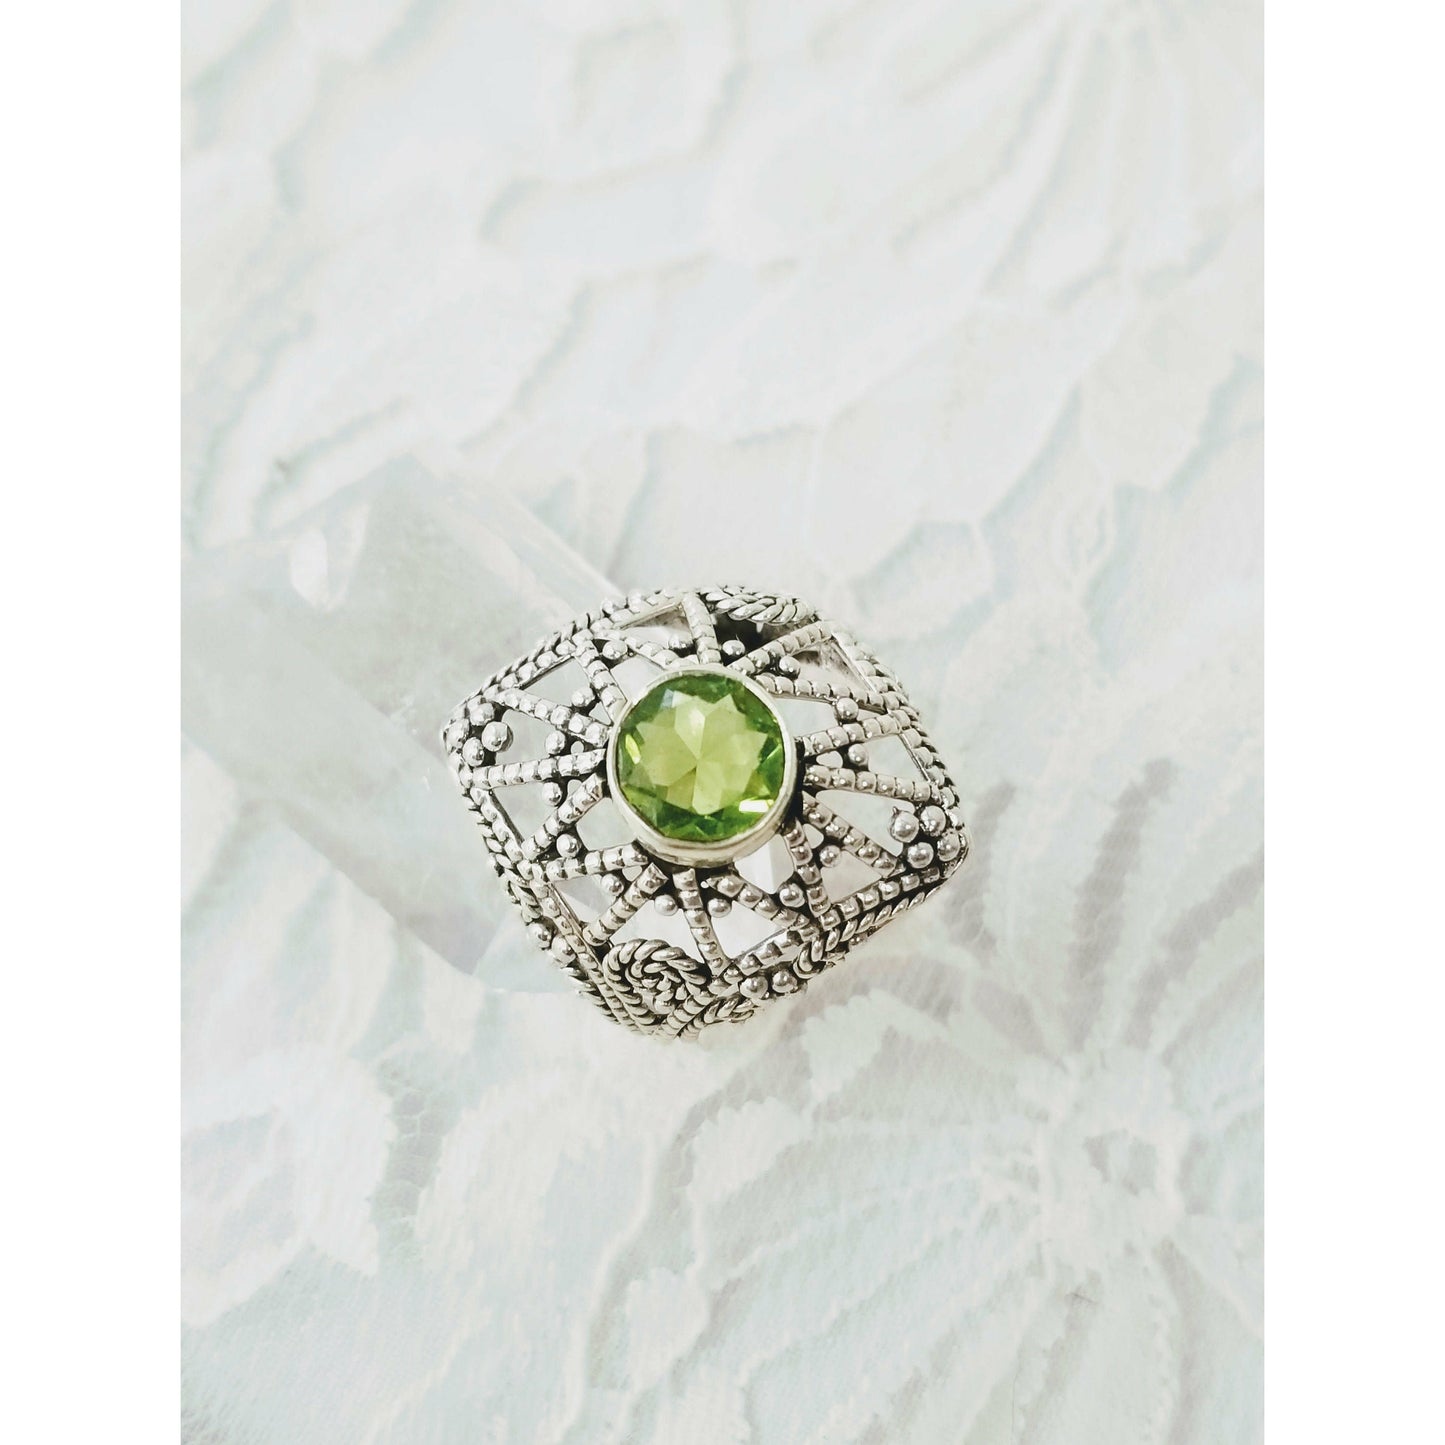 Victorian Filigree RING Peridot 925 Solid Sterling Silver Filigree Ring Jewelry Art Deco Style Ring ~ Size 9 ~ Esoteric Stone